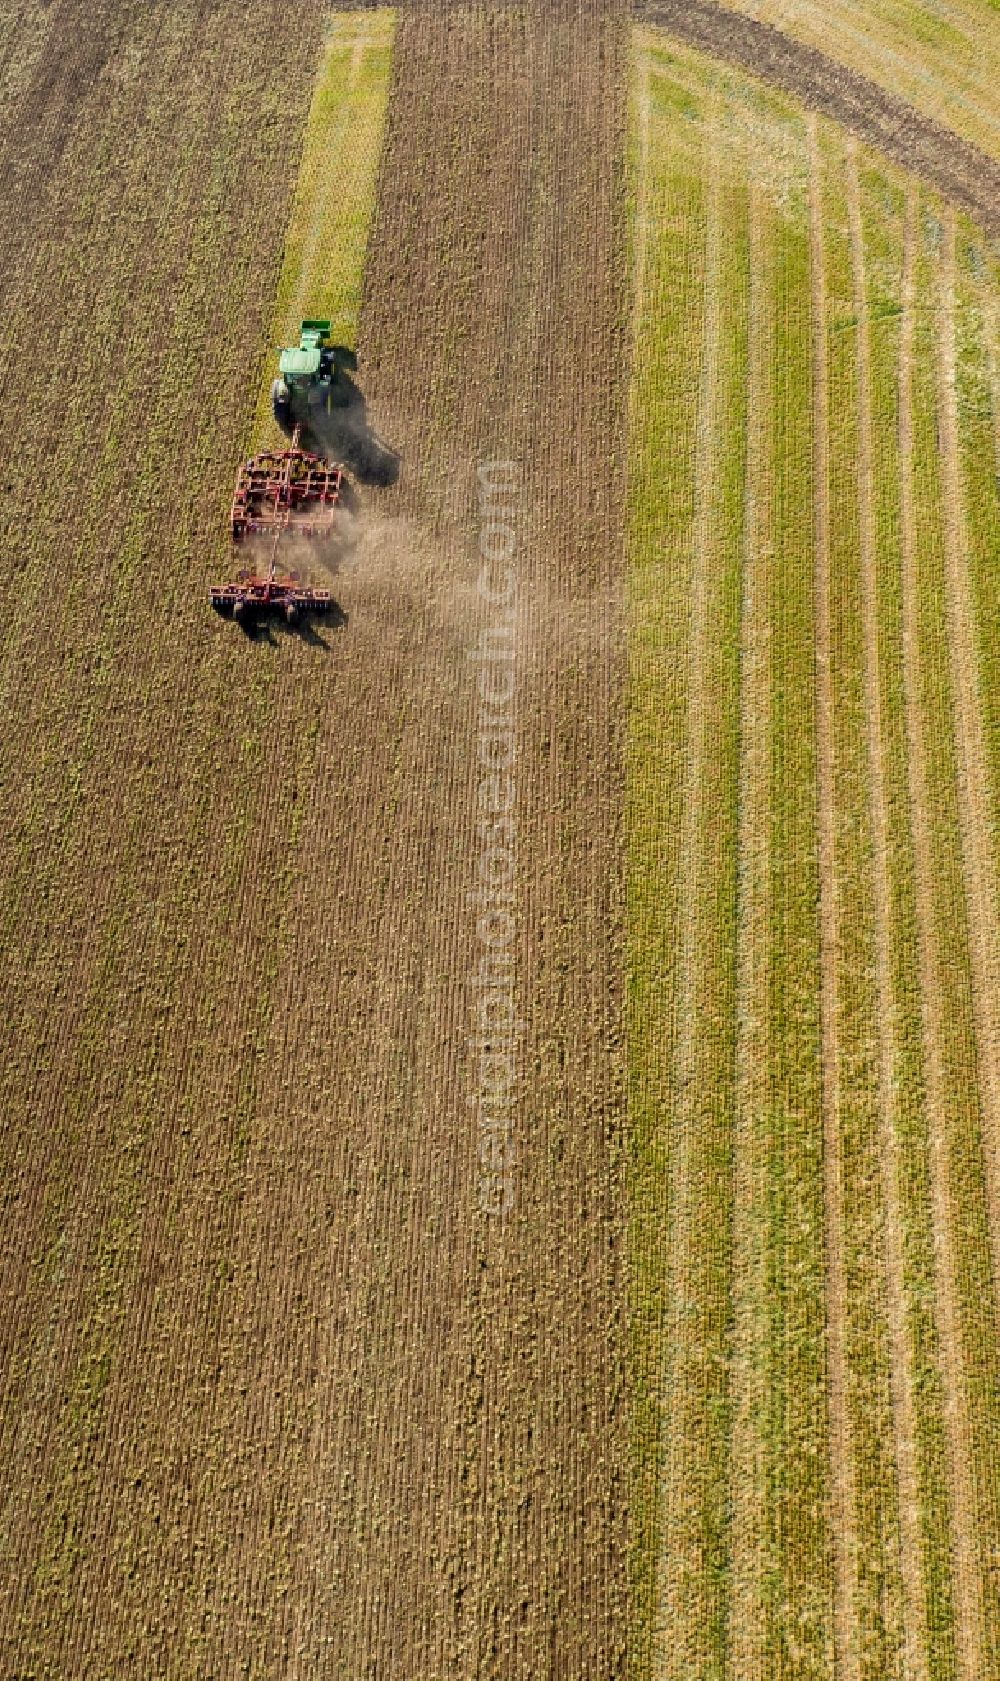 Aerial photograph Teutschenthal - Plowing and shifting the earth by a tractor with plow on agricultural fields in Teutschenthal in the state Saxony-Anhalt, Germany